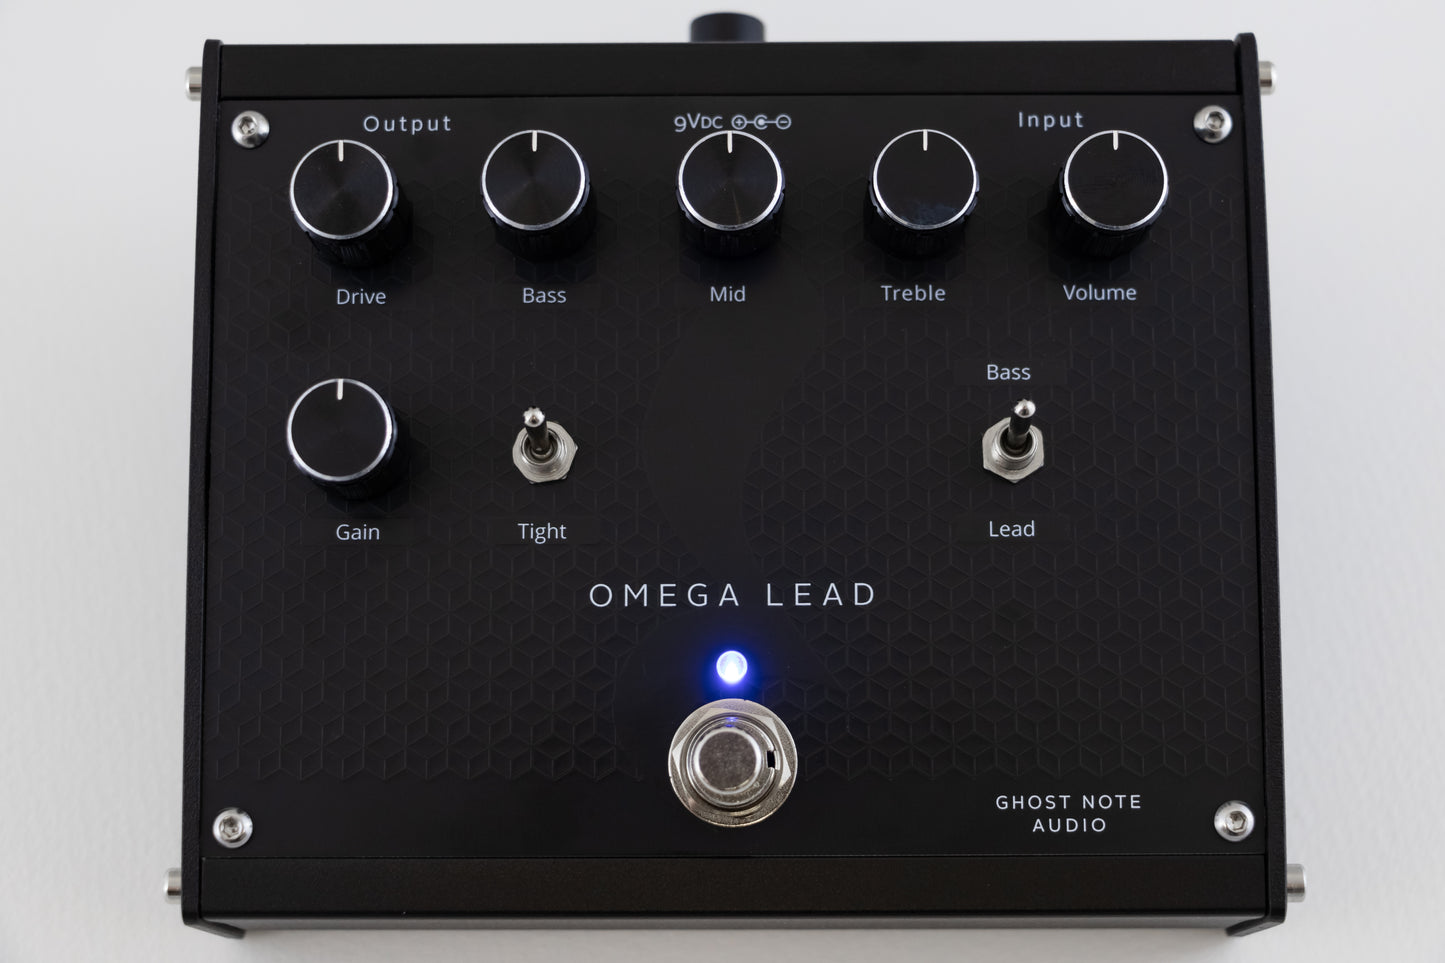 Omega Lead Preamp by Ghost Note Audio - Photograph